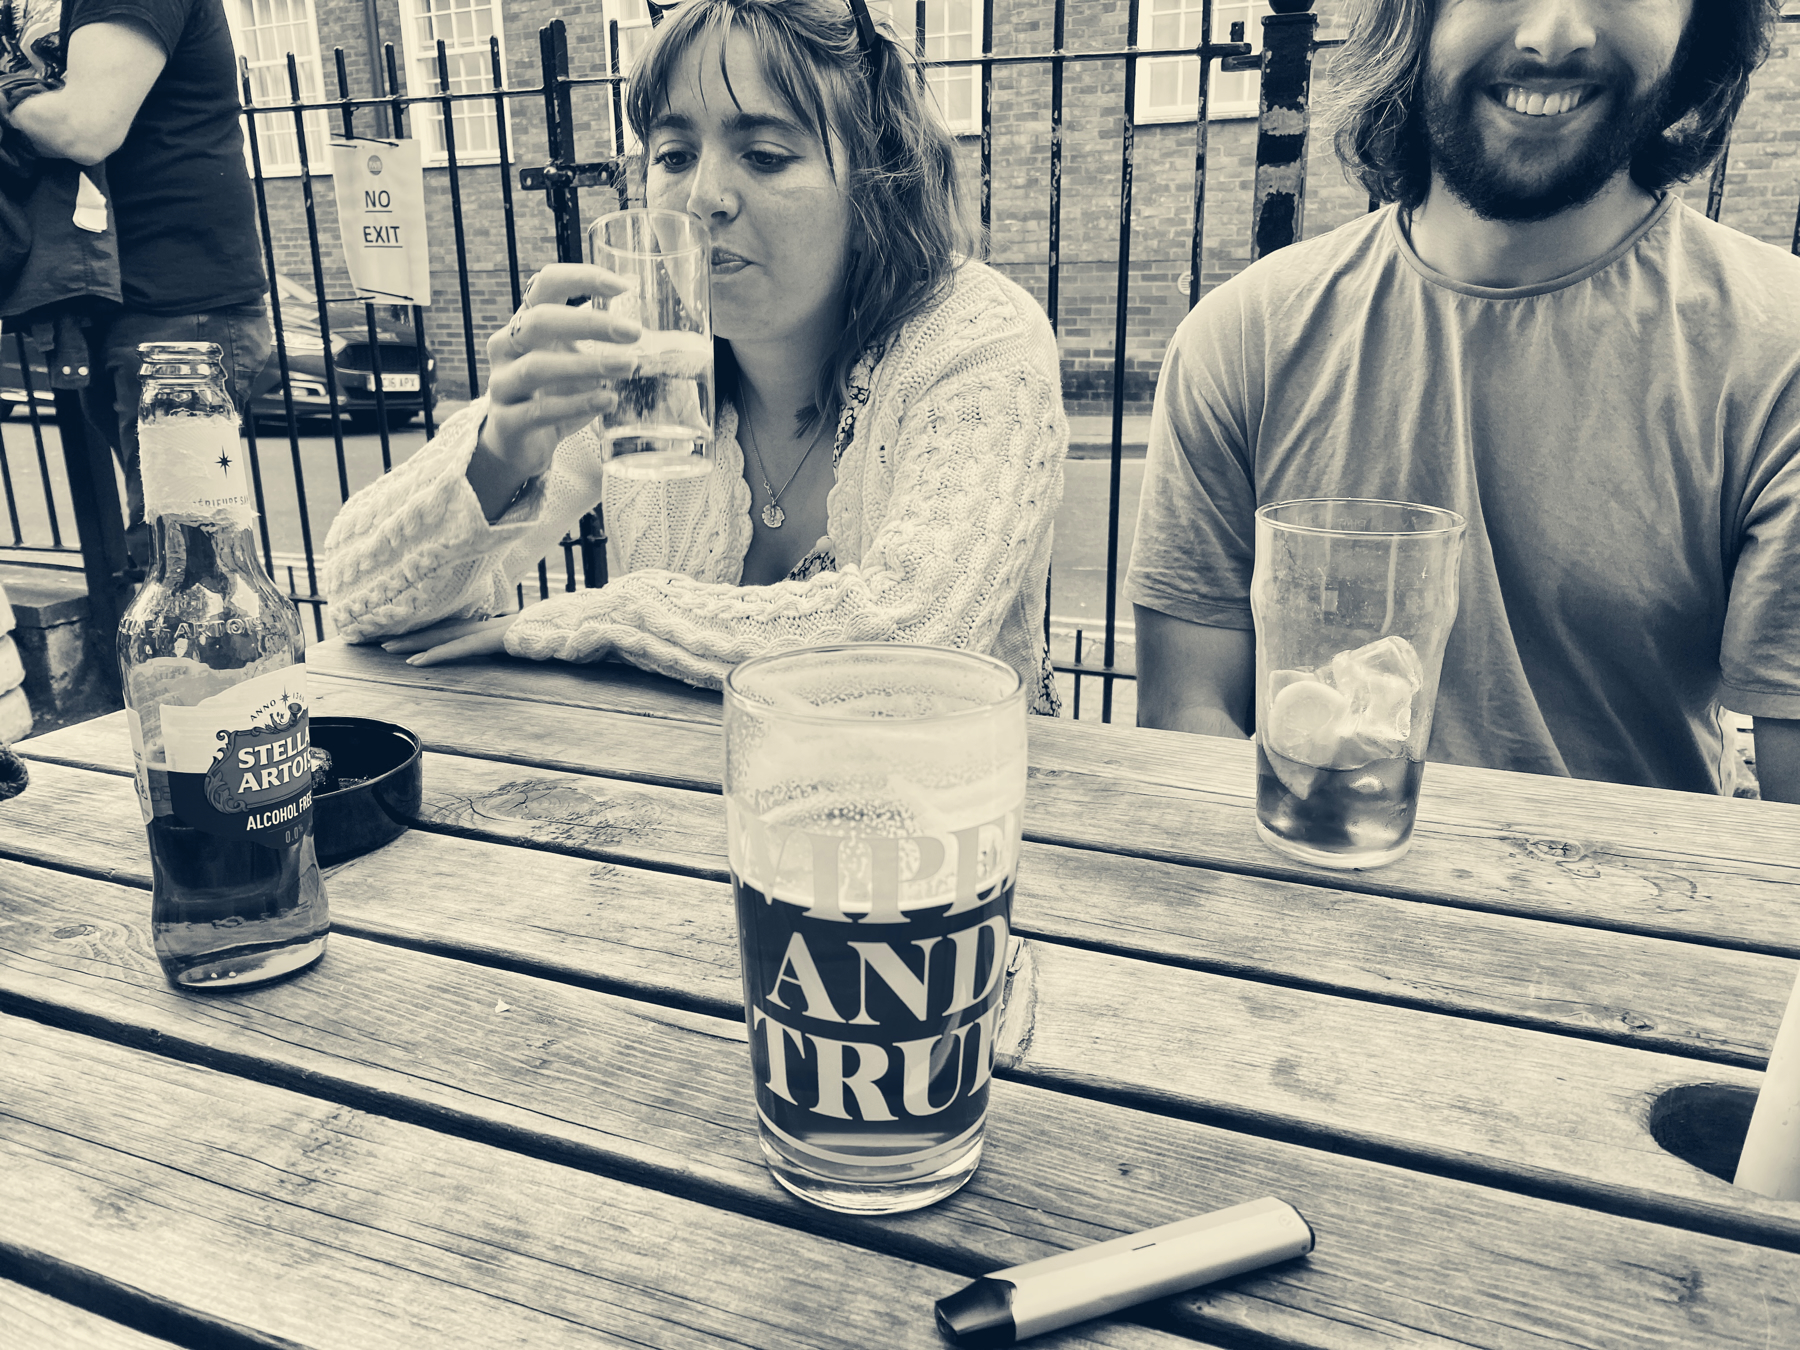 Monochrome picture of pint of beer on an outdoor pub table, woman drinking beer on opposite side of table